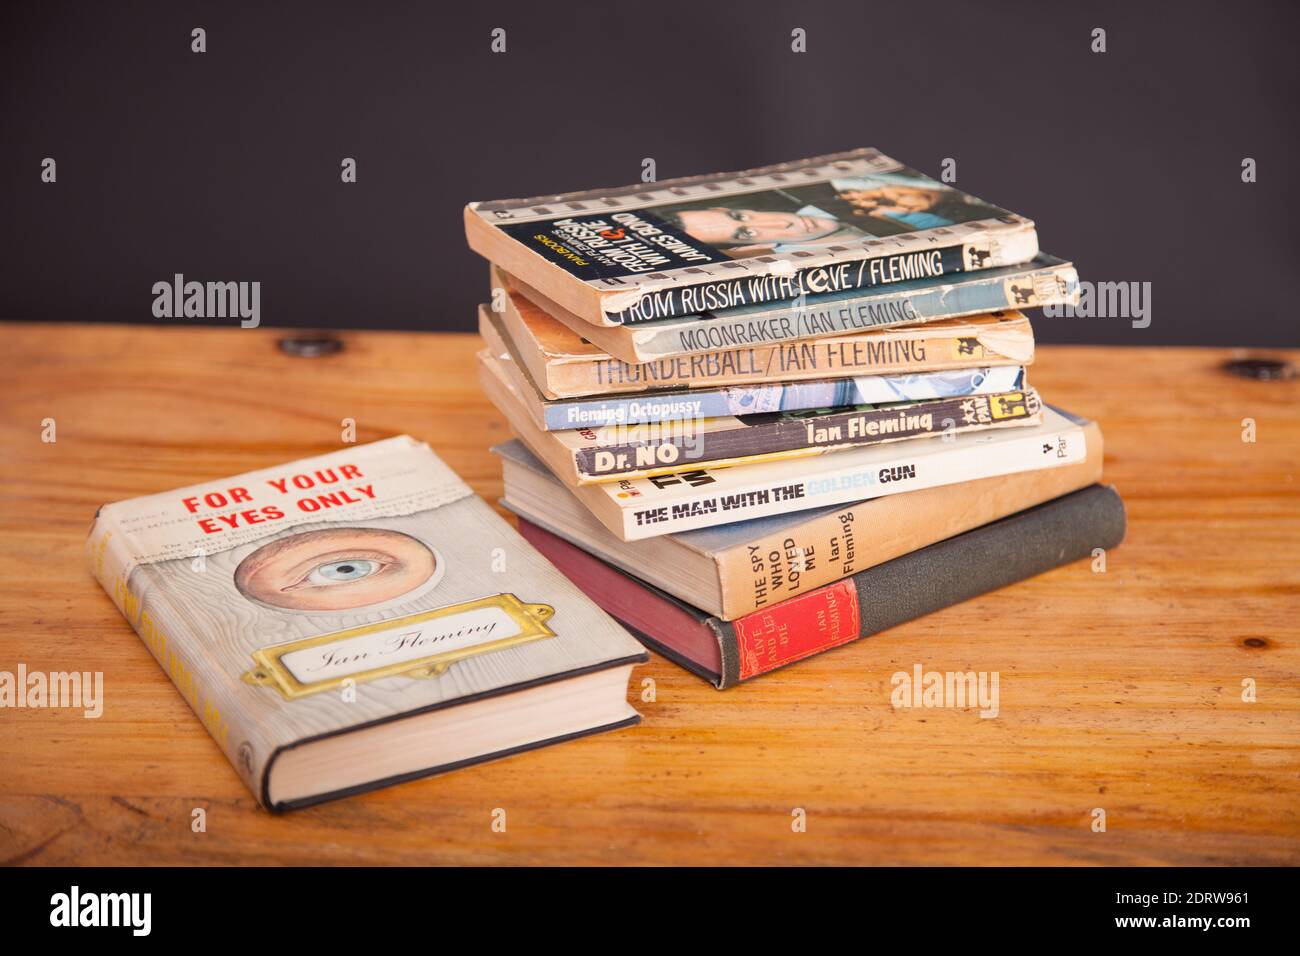 A stack of vintage James Bond 007 books on wooden table Stock Photo